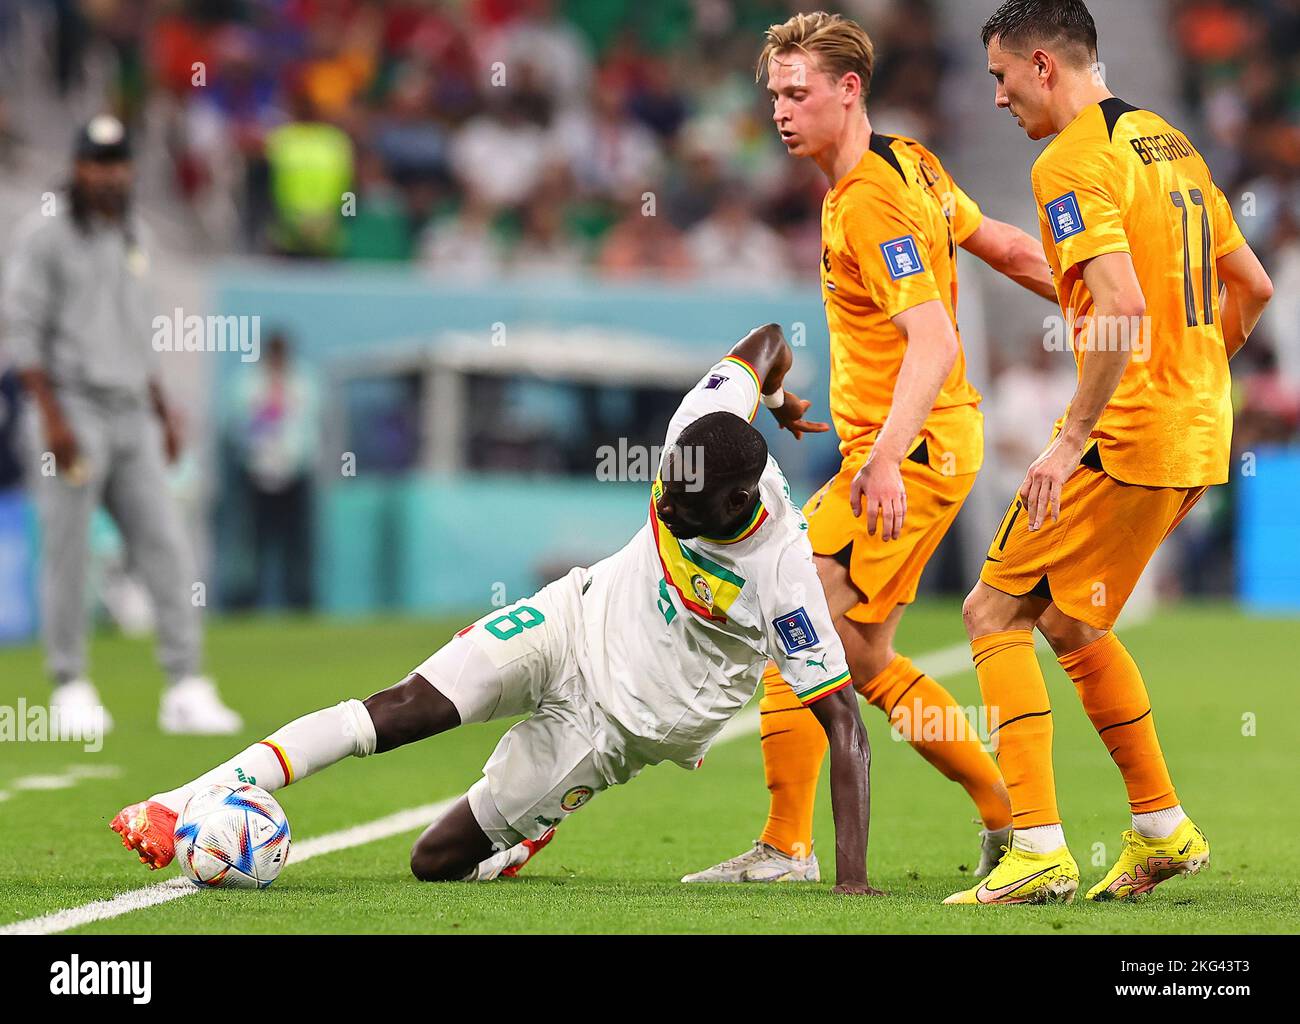 Doha, Qatar. 21st Nov, 2022. Cheikhou Kouyate (L) of Senegal saves the ball during the Group A match between Senegal and the Netherlands at the 2022 FIFA World Cup at Al Thumama Stadium in Doha, Qatar, Nov. 21, 2022. Credit: Ding Xu/Xinhua/Alamy Live News Stock Photo